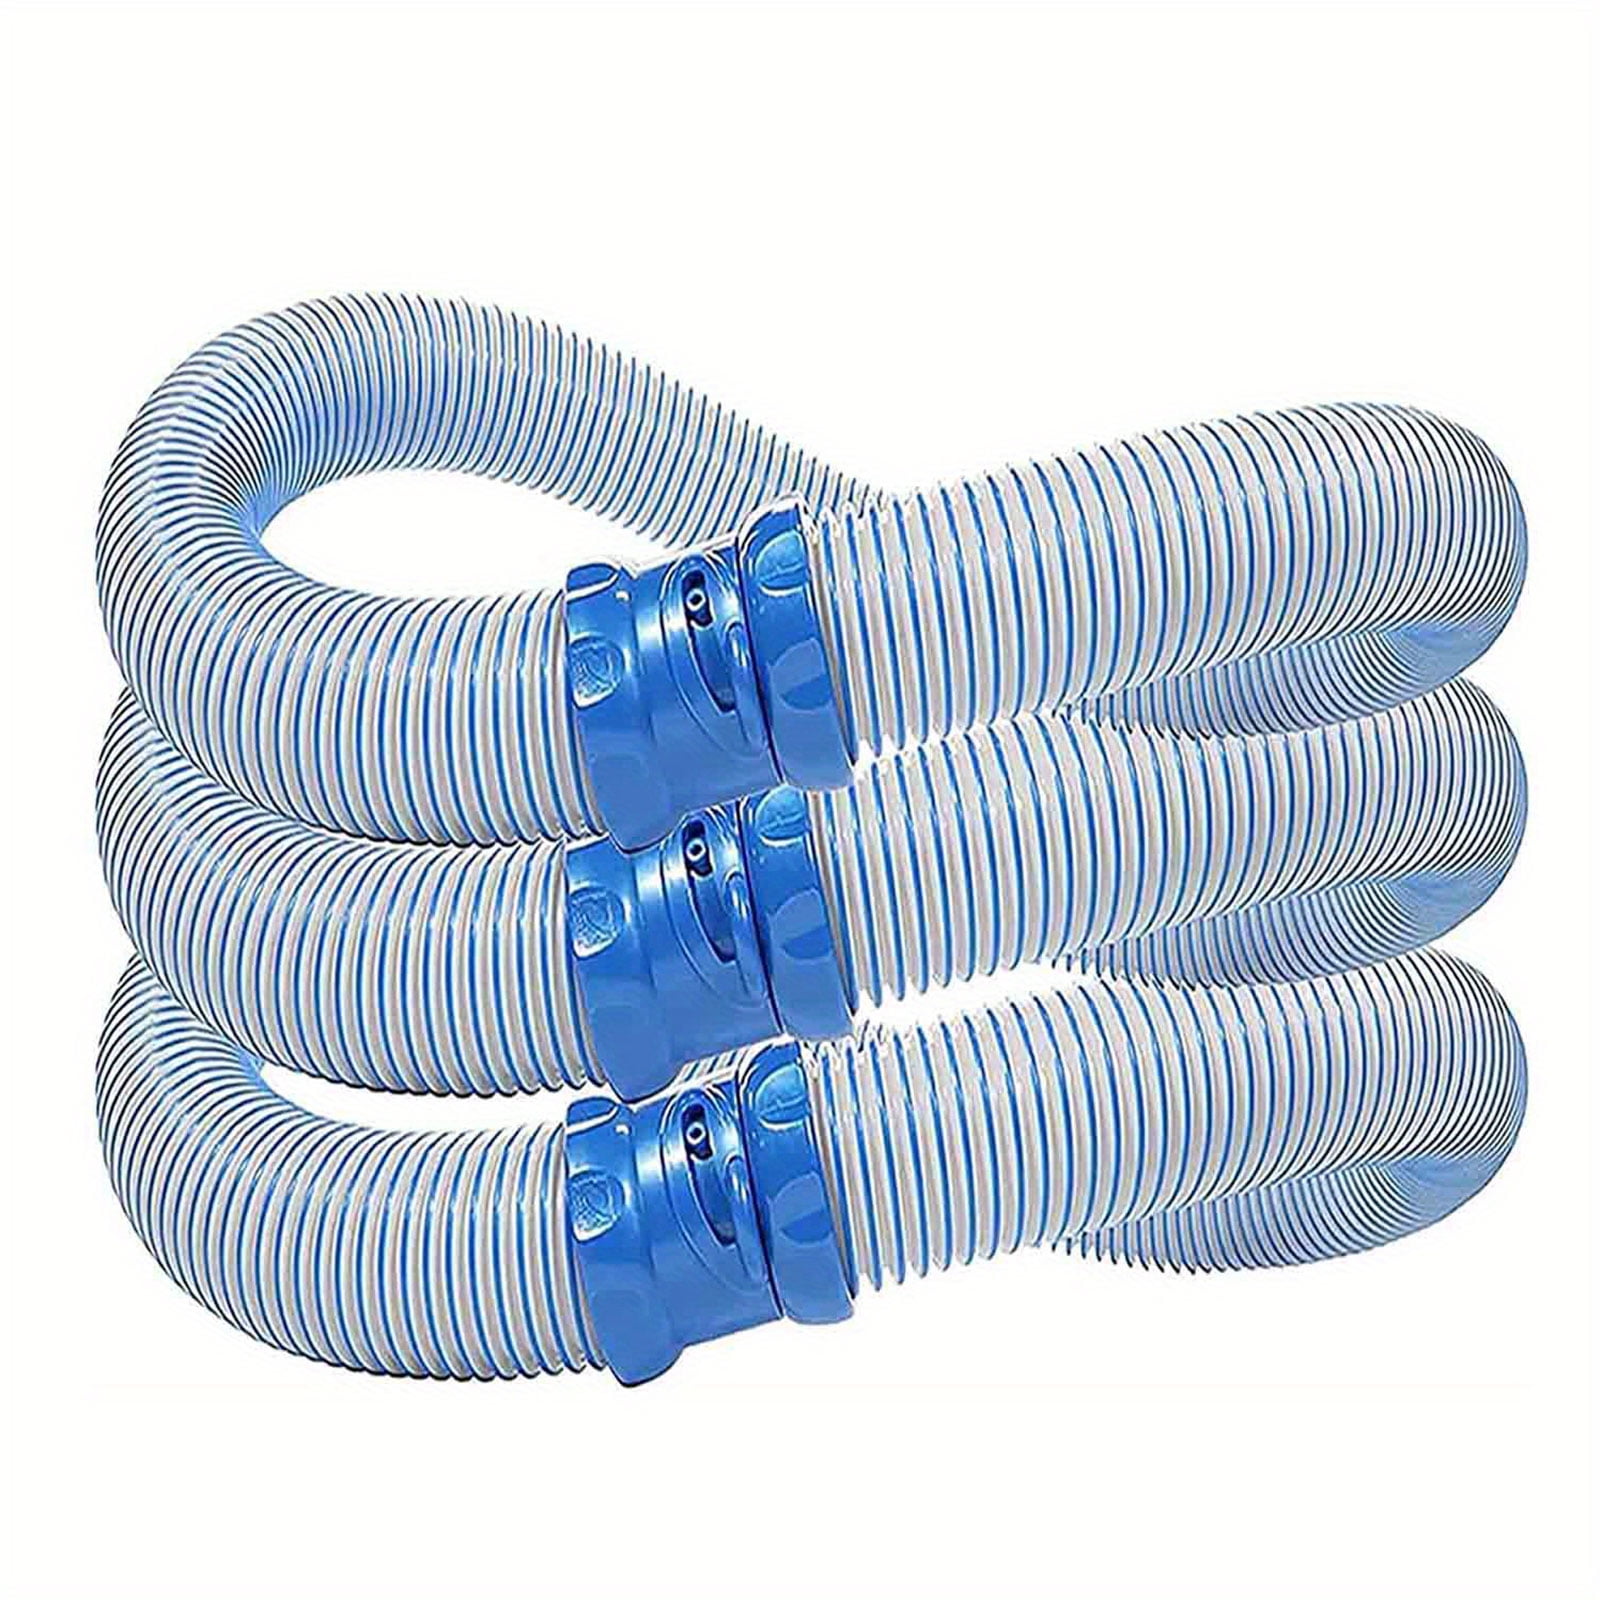 5Pcs for Zodiac Mx6 Mx8 Pool Cleaner Lock Hose Replacement Kit Pool Cleaner  Hose Small Hose, 1M Twist Lock Hose R0527700 X38210S 